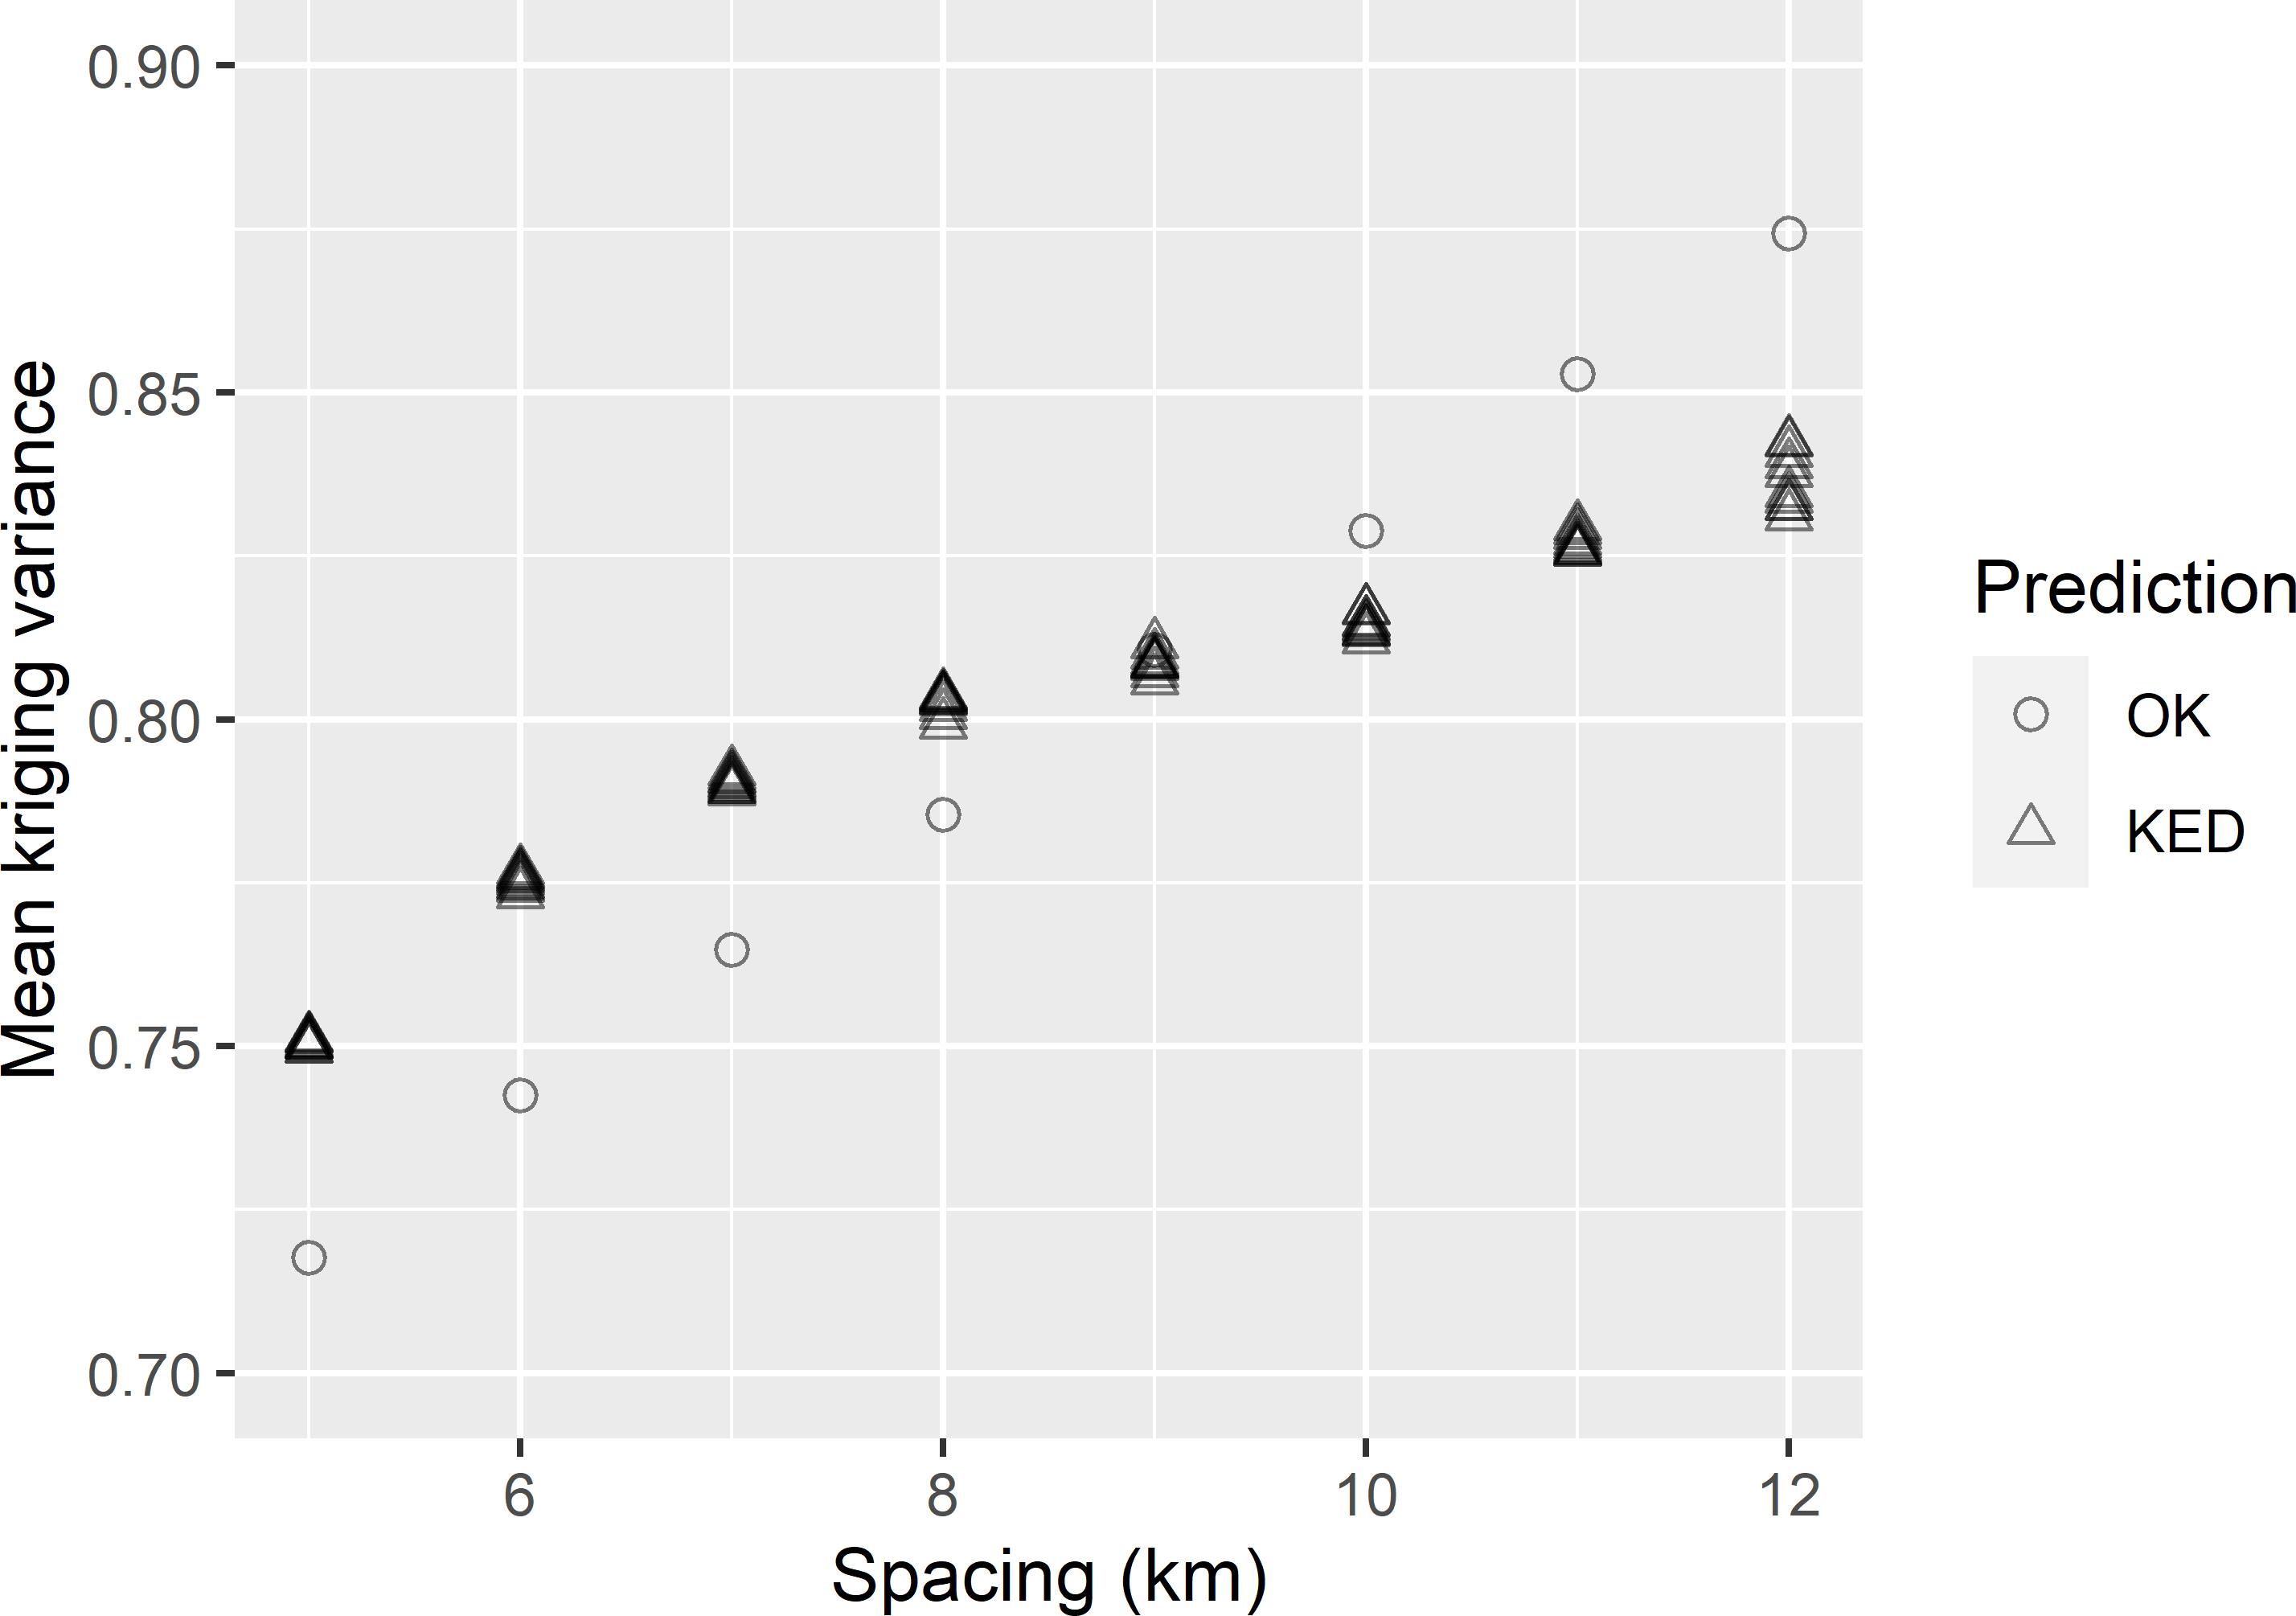 Mean kriging variance of OK and KED predictions of the SOM concentration in West-Amhara, as a function of the spacing of a square grid. With KED for each spacing, ten MKV values are shown obtained by selecting ten randomly placed grids of that spacing.